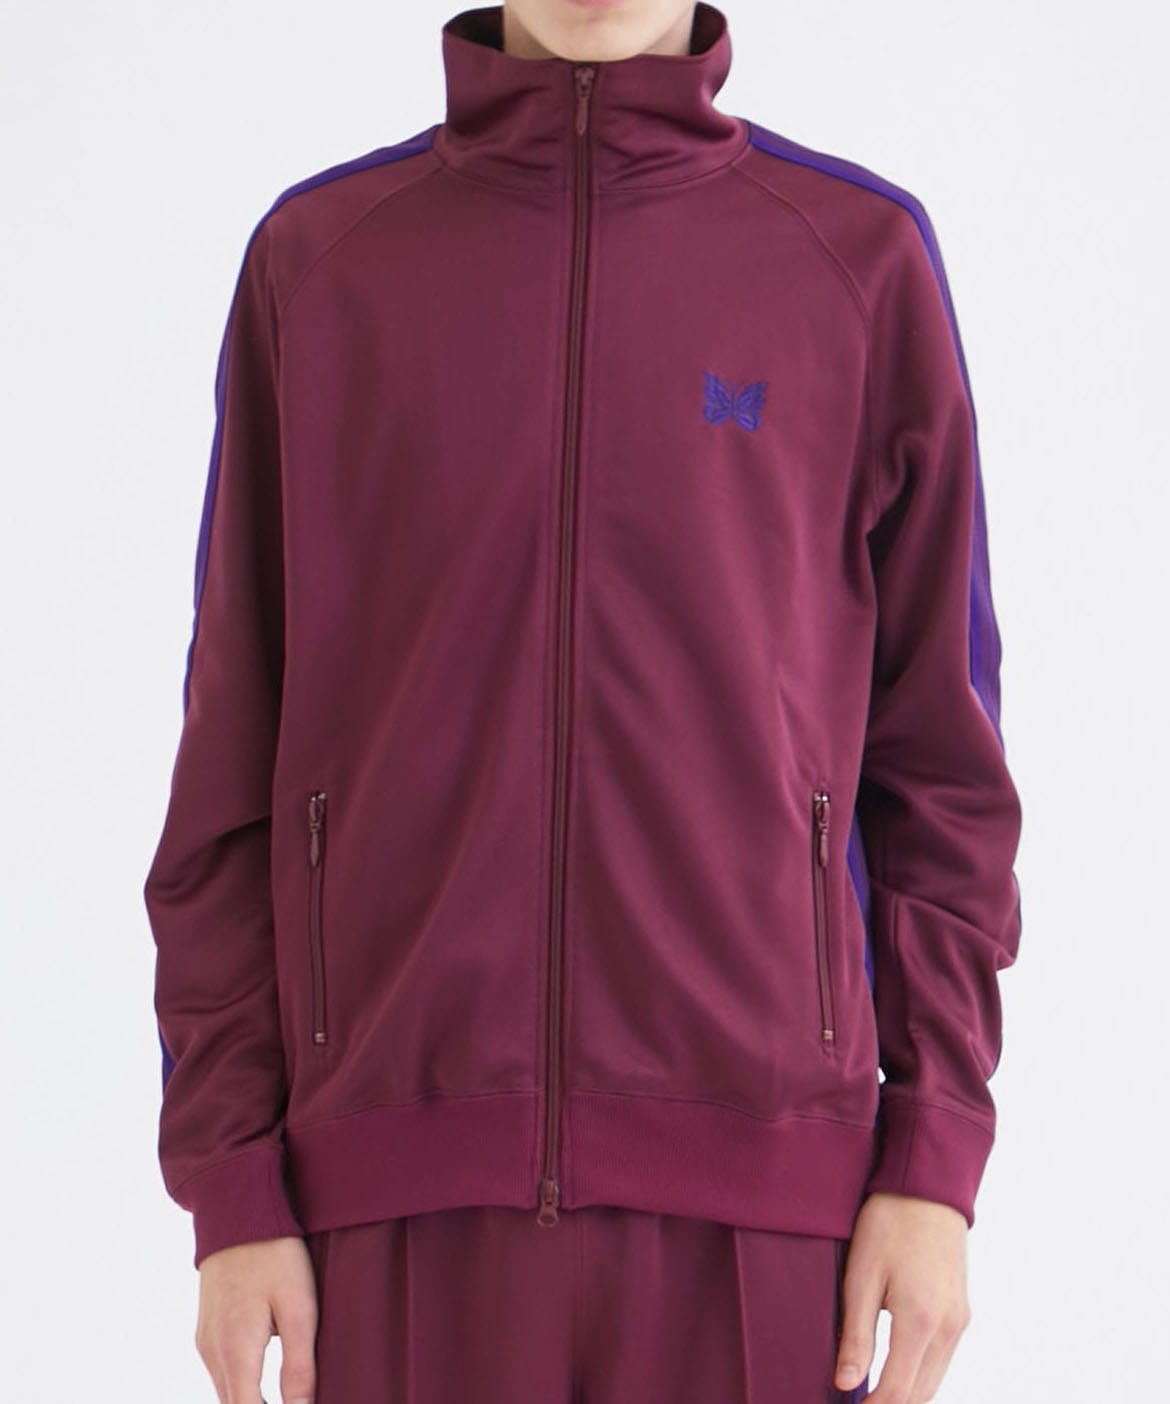 needles 21aw poly smooth track jacket